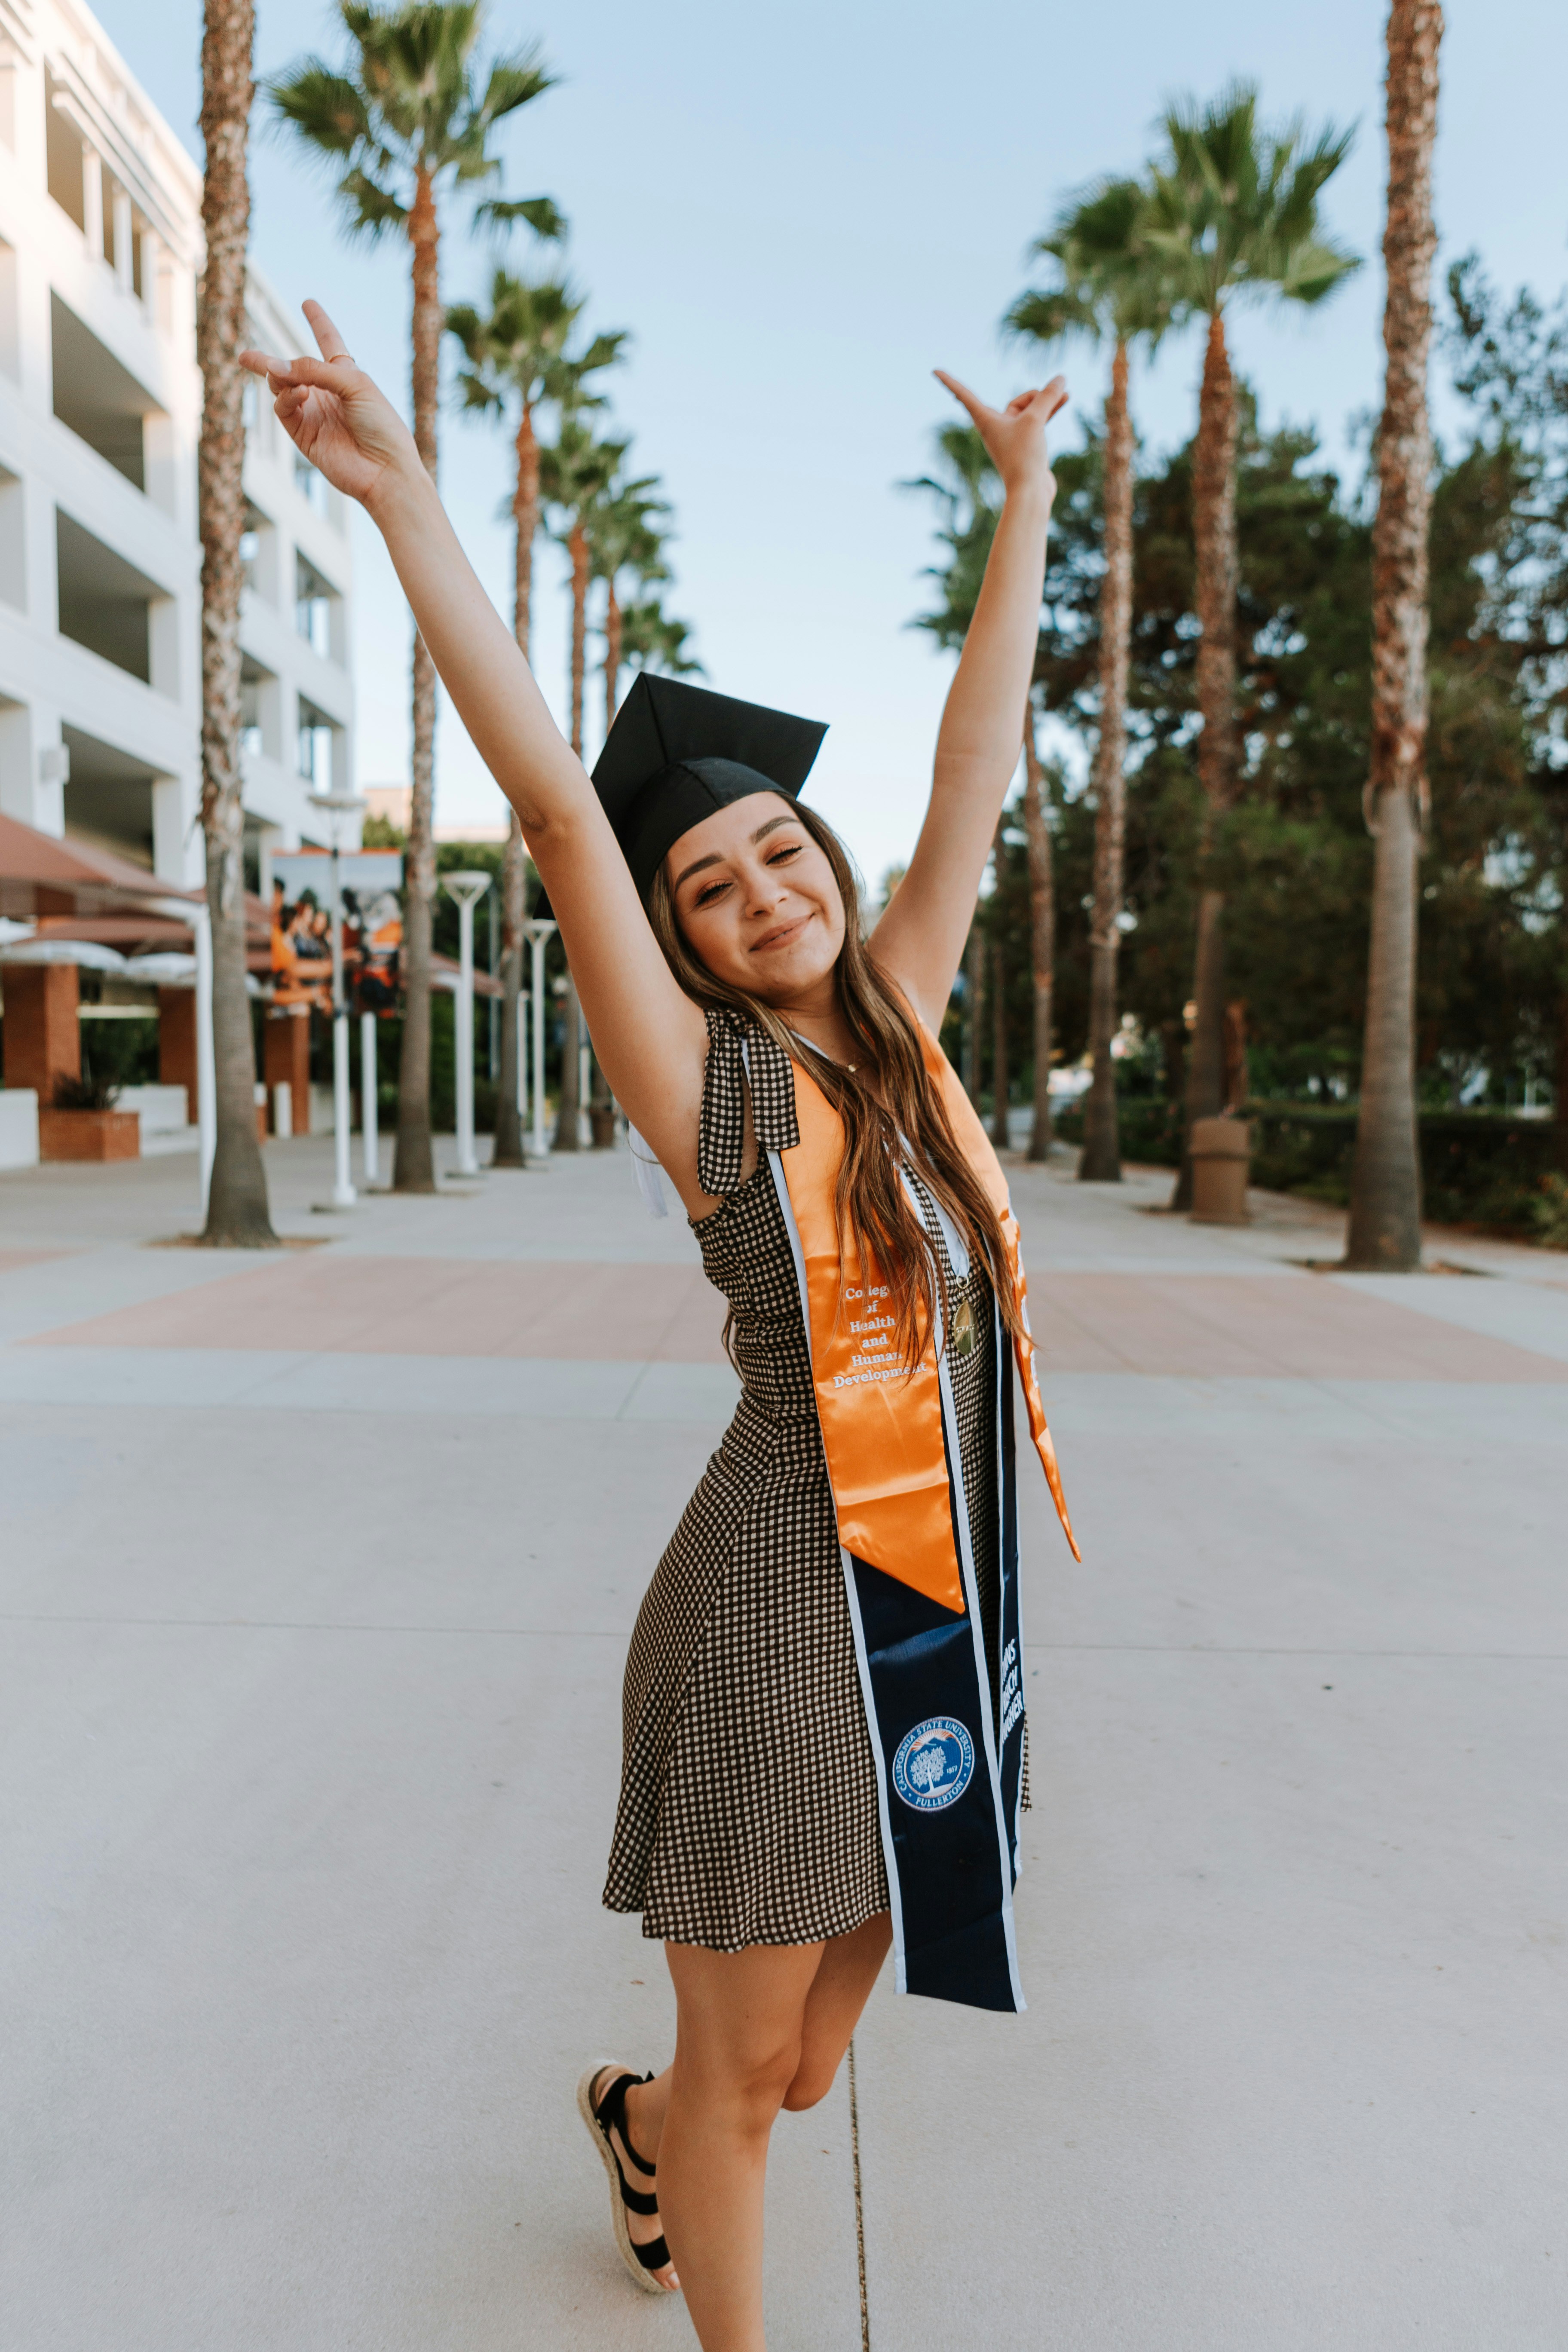 500+ College Girl Pictures HQ Download Free Images on Unsplash pic